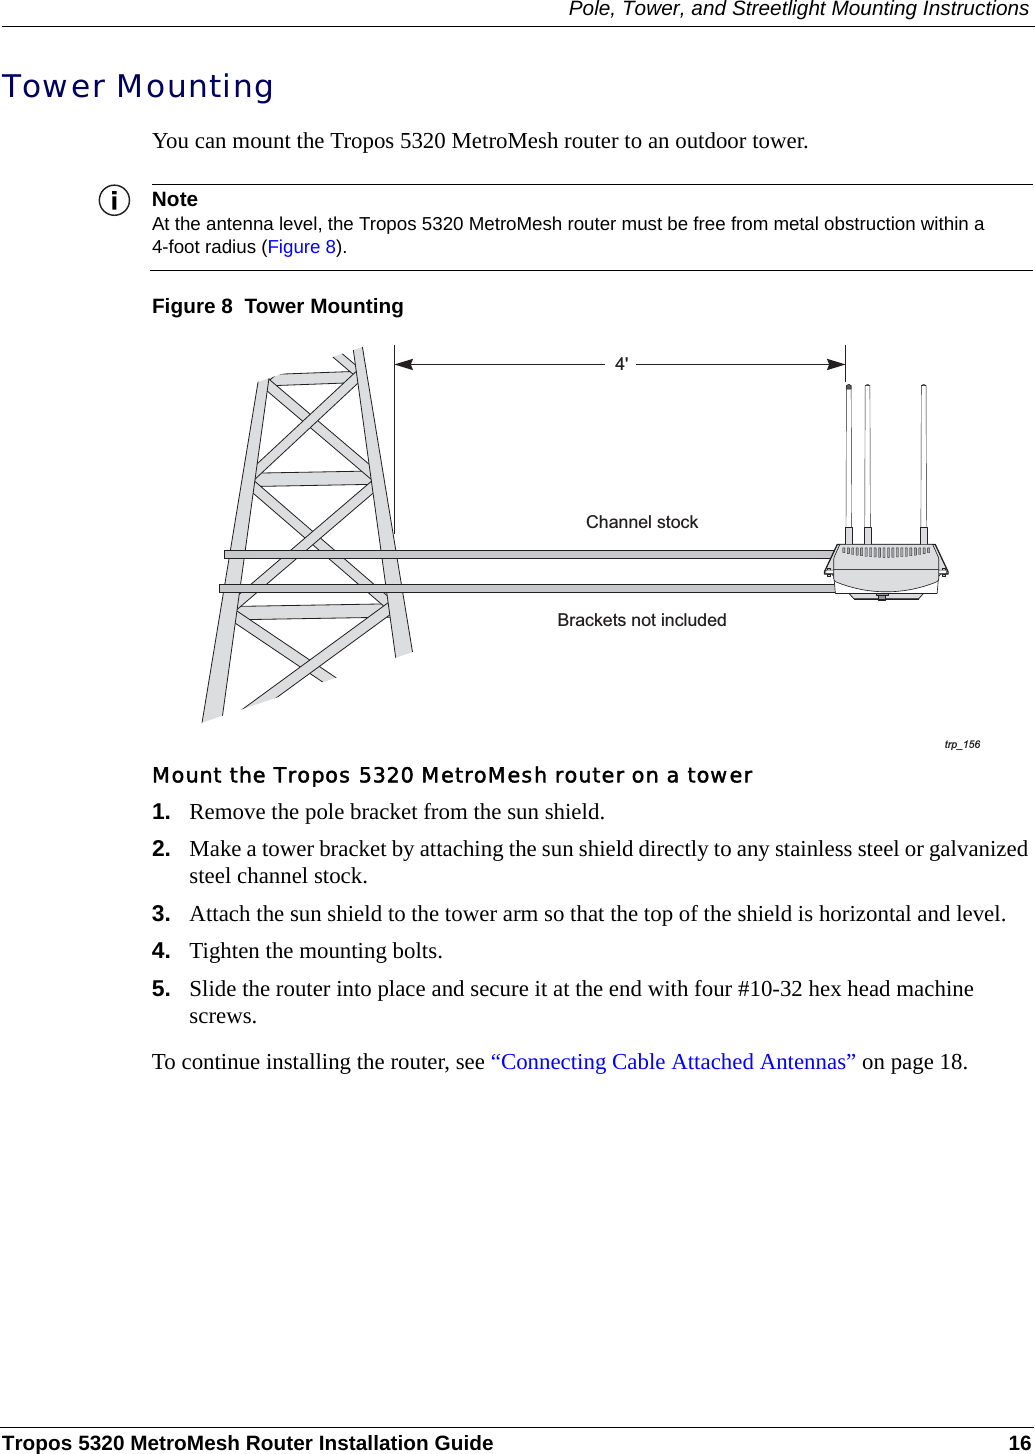 Pole, Tower, and Streetlight Mounting InstructionsTropos 5320 MetroMesh Router Installation Guide 16Tower MountingYou can mount the Tropos 5320 MetroMesh router to an outdoor tower. NoteAt the antenna level, the Tropos 5320 MetroMesh router must be free from metal obstruction within a 4-foot radius (Figure 8).Figure 8  Tower MountingMount the Tropos 5320 MetroMesh router on a tower1. Remove the pole bracket from the sun shield.2. Make a tower bracket by attaching the sun shield directly to any stainless steel or galvanized steel channel stock. 3. Attach the sun shield to the tower arm so that the top of the shield is horizontal and level.4. Tighten the mounting bolts.5. Slide the router into place and secure it at the end with four #10-32 hex head machine screws.To continue installing the router, see “Connecting Cable Attached Antennas” on page 18.trp_1564&apos;Brackets not includedChannel stock